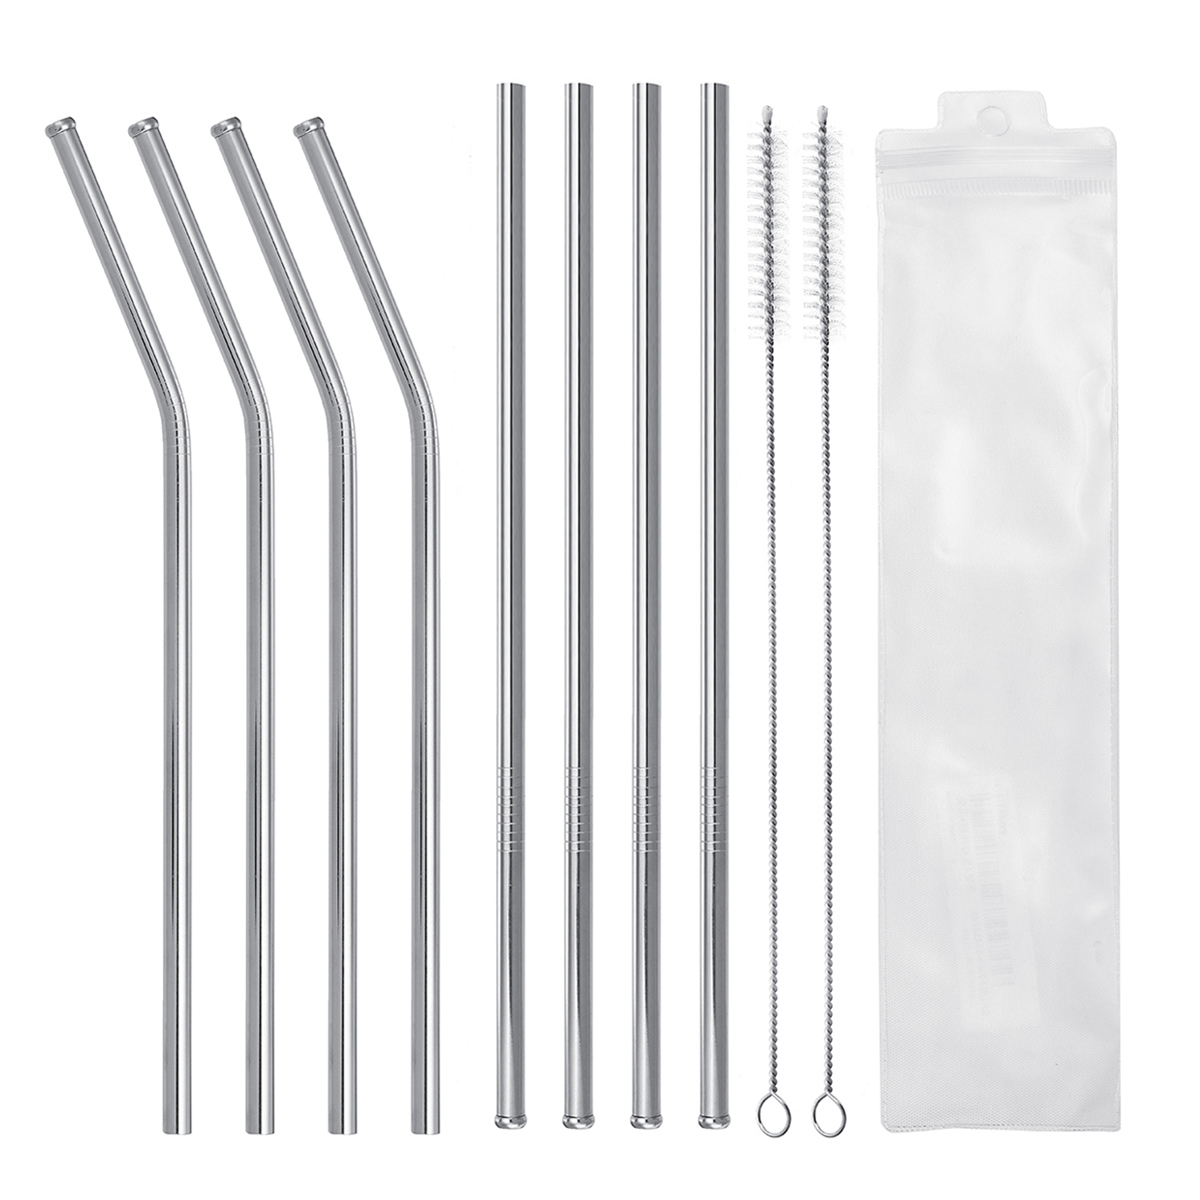 

Reusable Straw Stainless Steel Straws Reusable Metal Drinking Straws with Cleaning Brushes Pouch